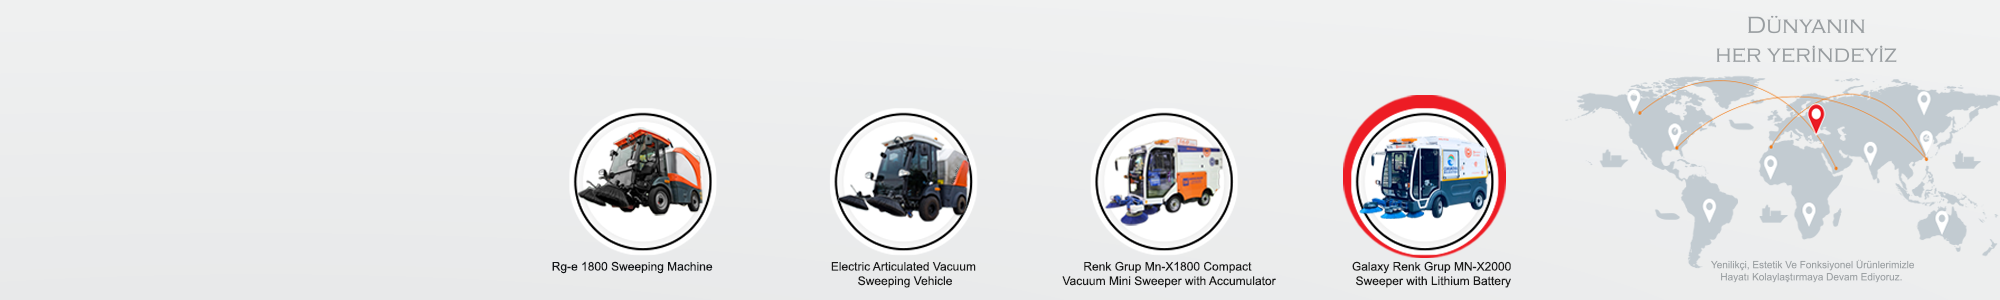 Galaxy Renk Grup MN-X2000 Sweeper with Lithium Battery